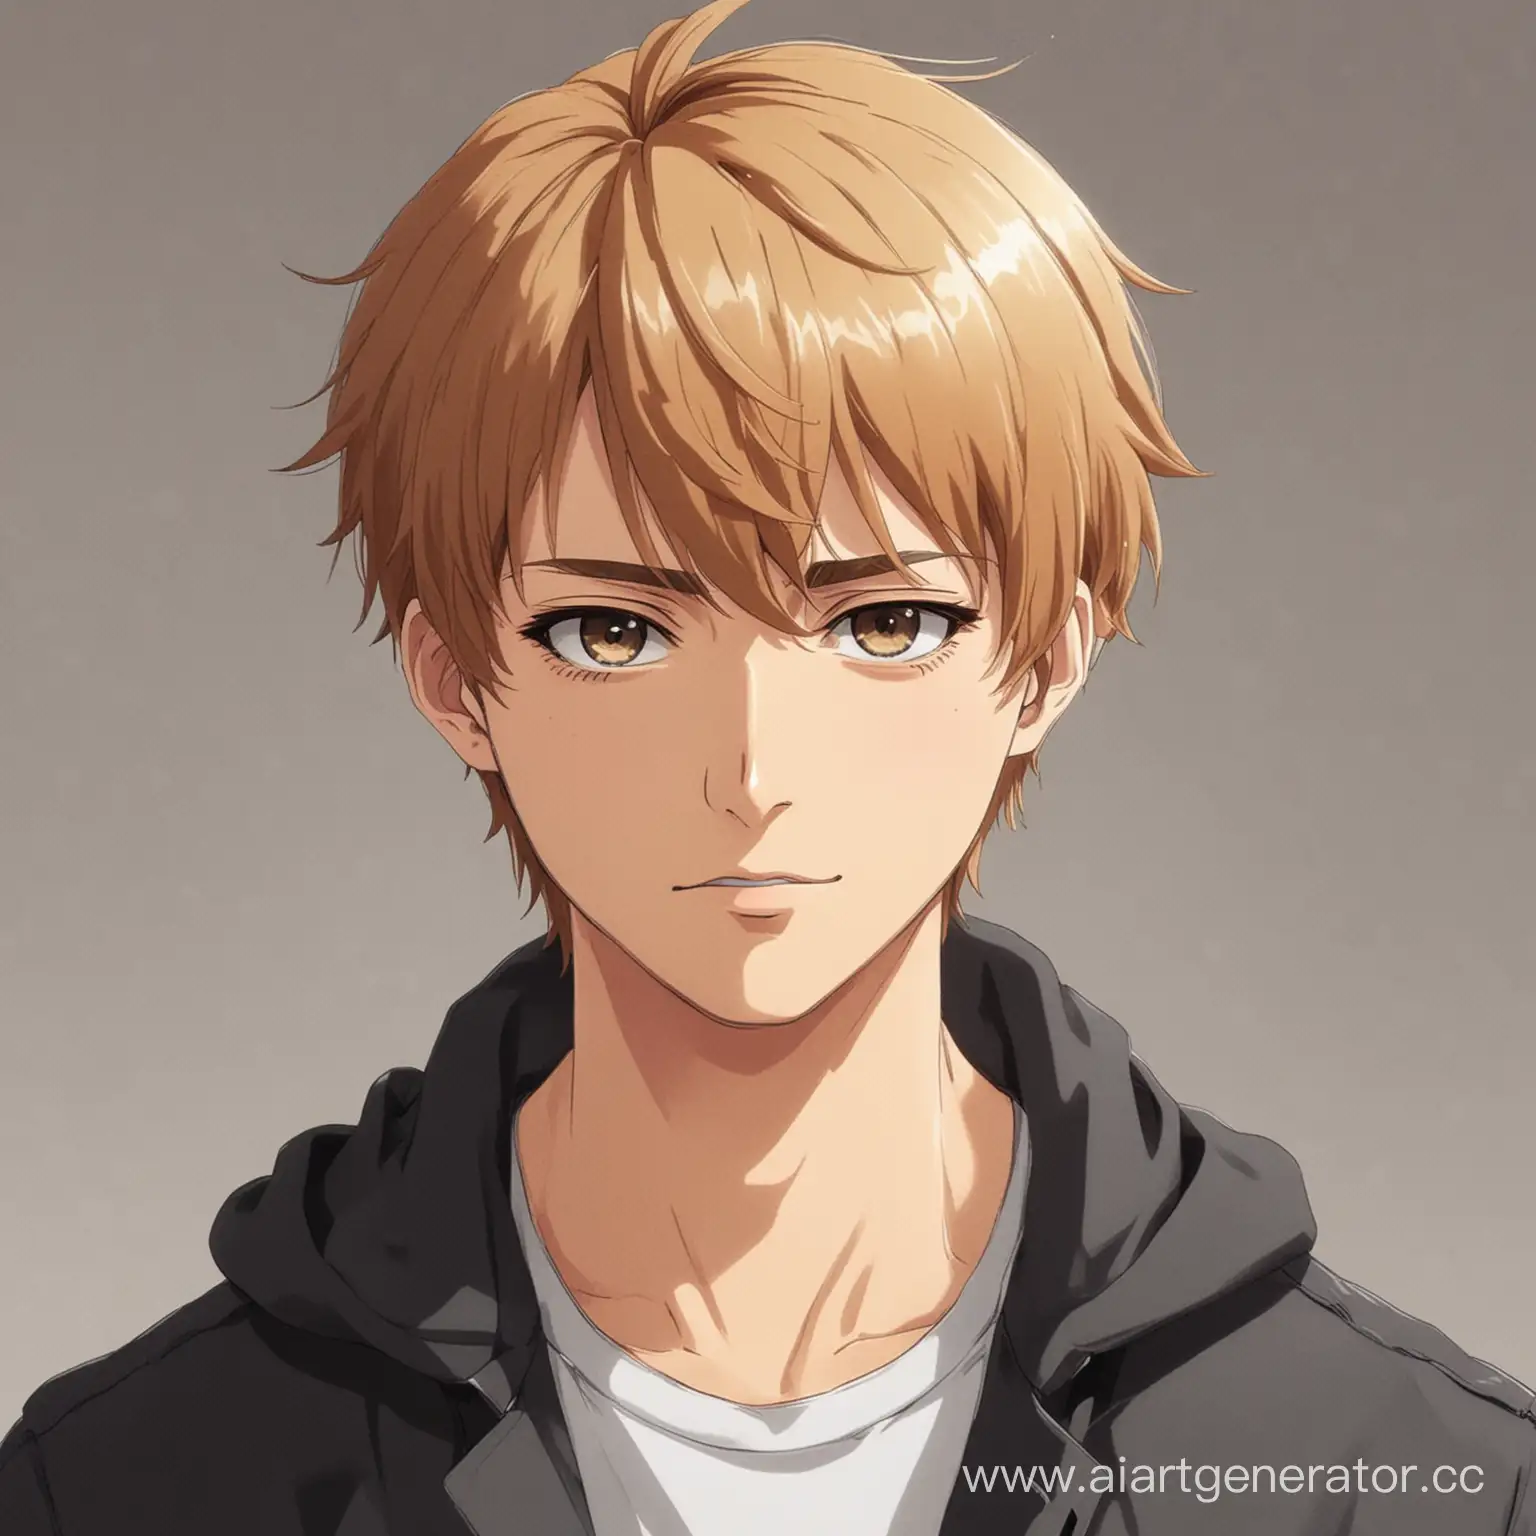 Stylish-Anime-Character-with-Short-Hair